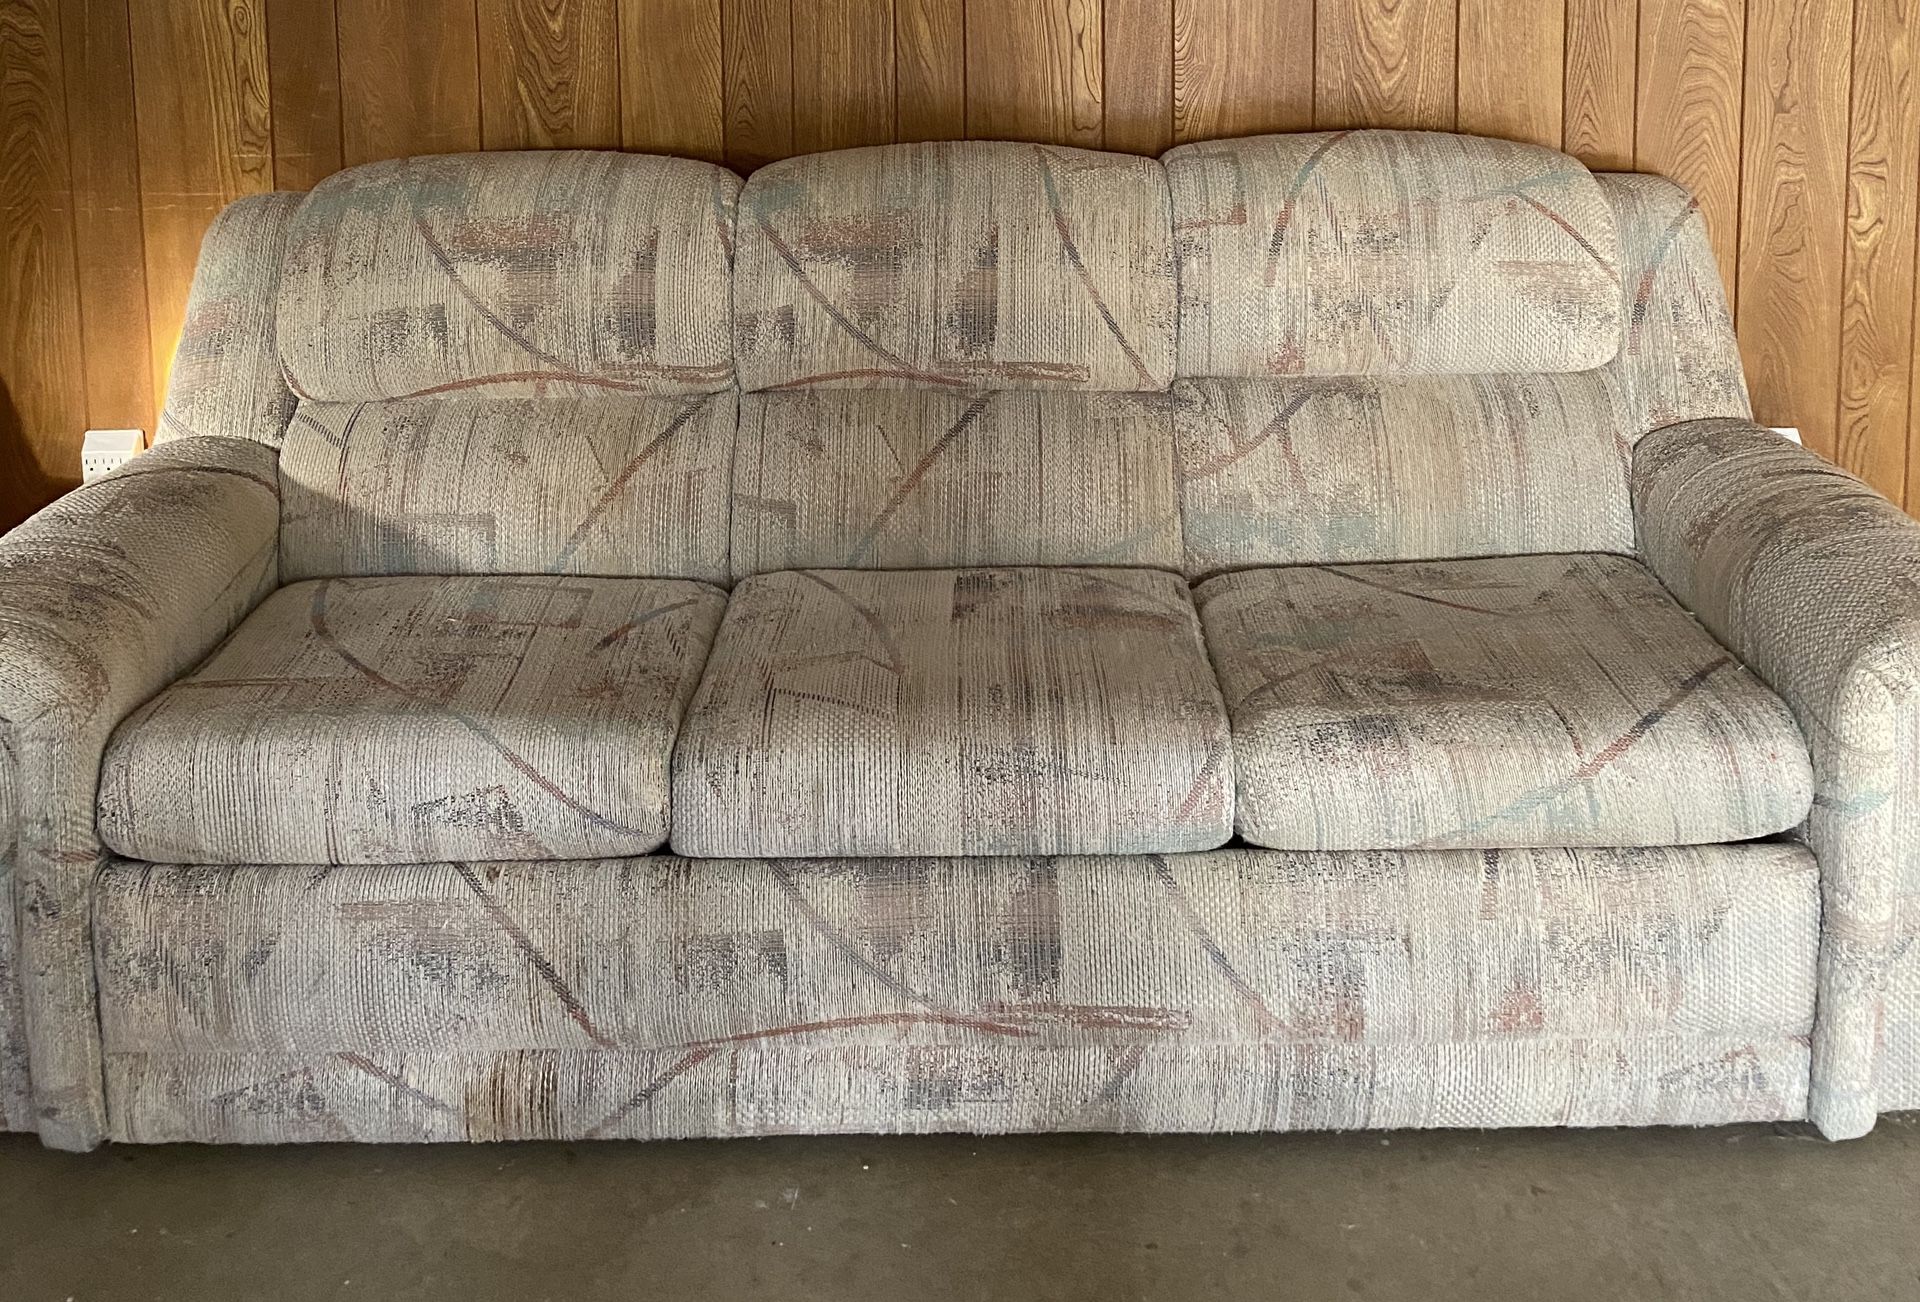 FREE....... Rocker/Recliner - Sofa bed couch